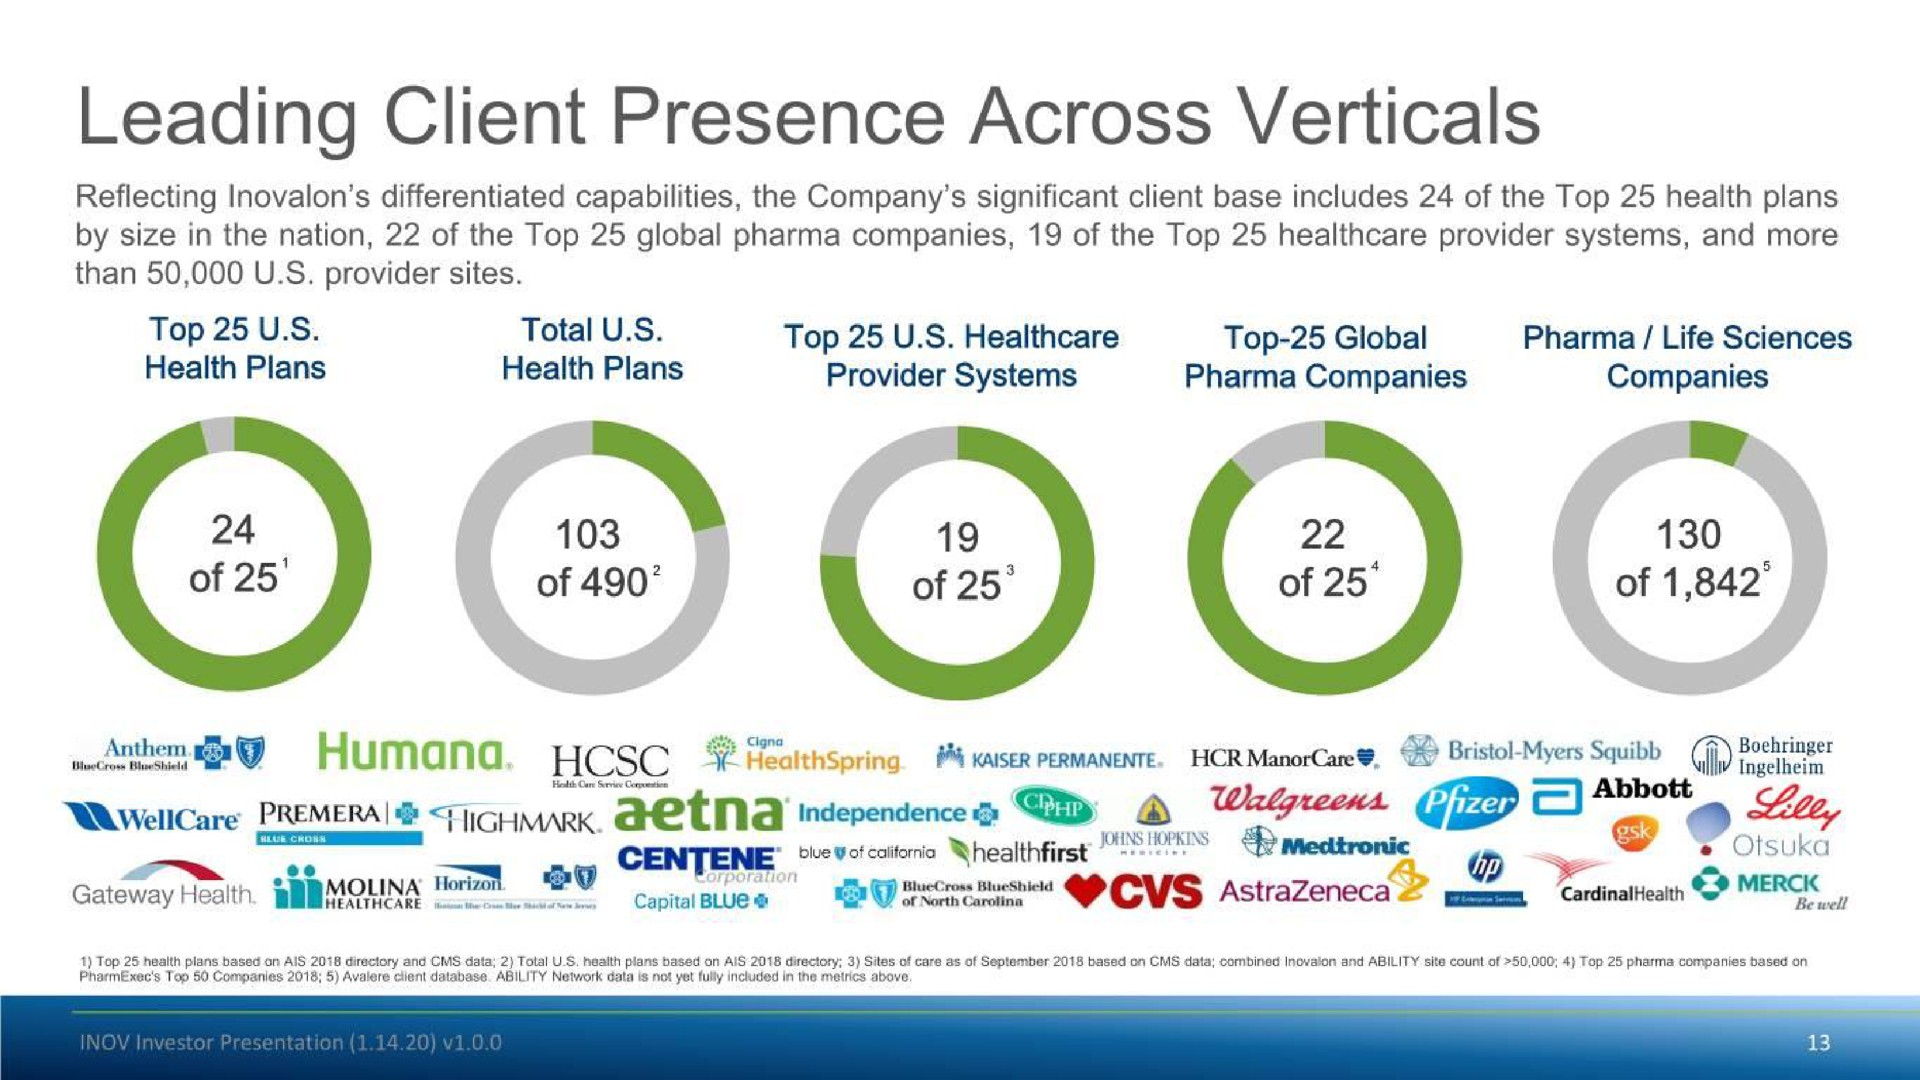 leading client presence across verticals top health plans total health plans top provider systems top global companies of of of life sciences companies of independence i | Inovalon